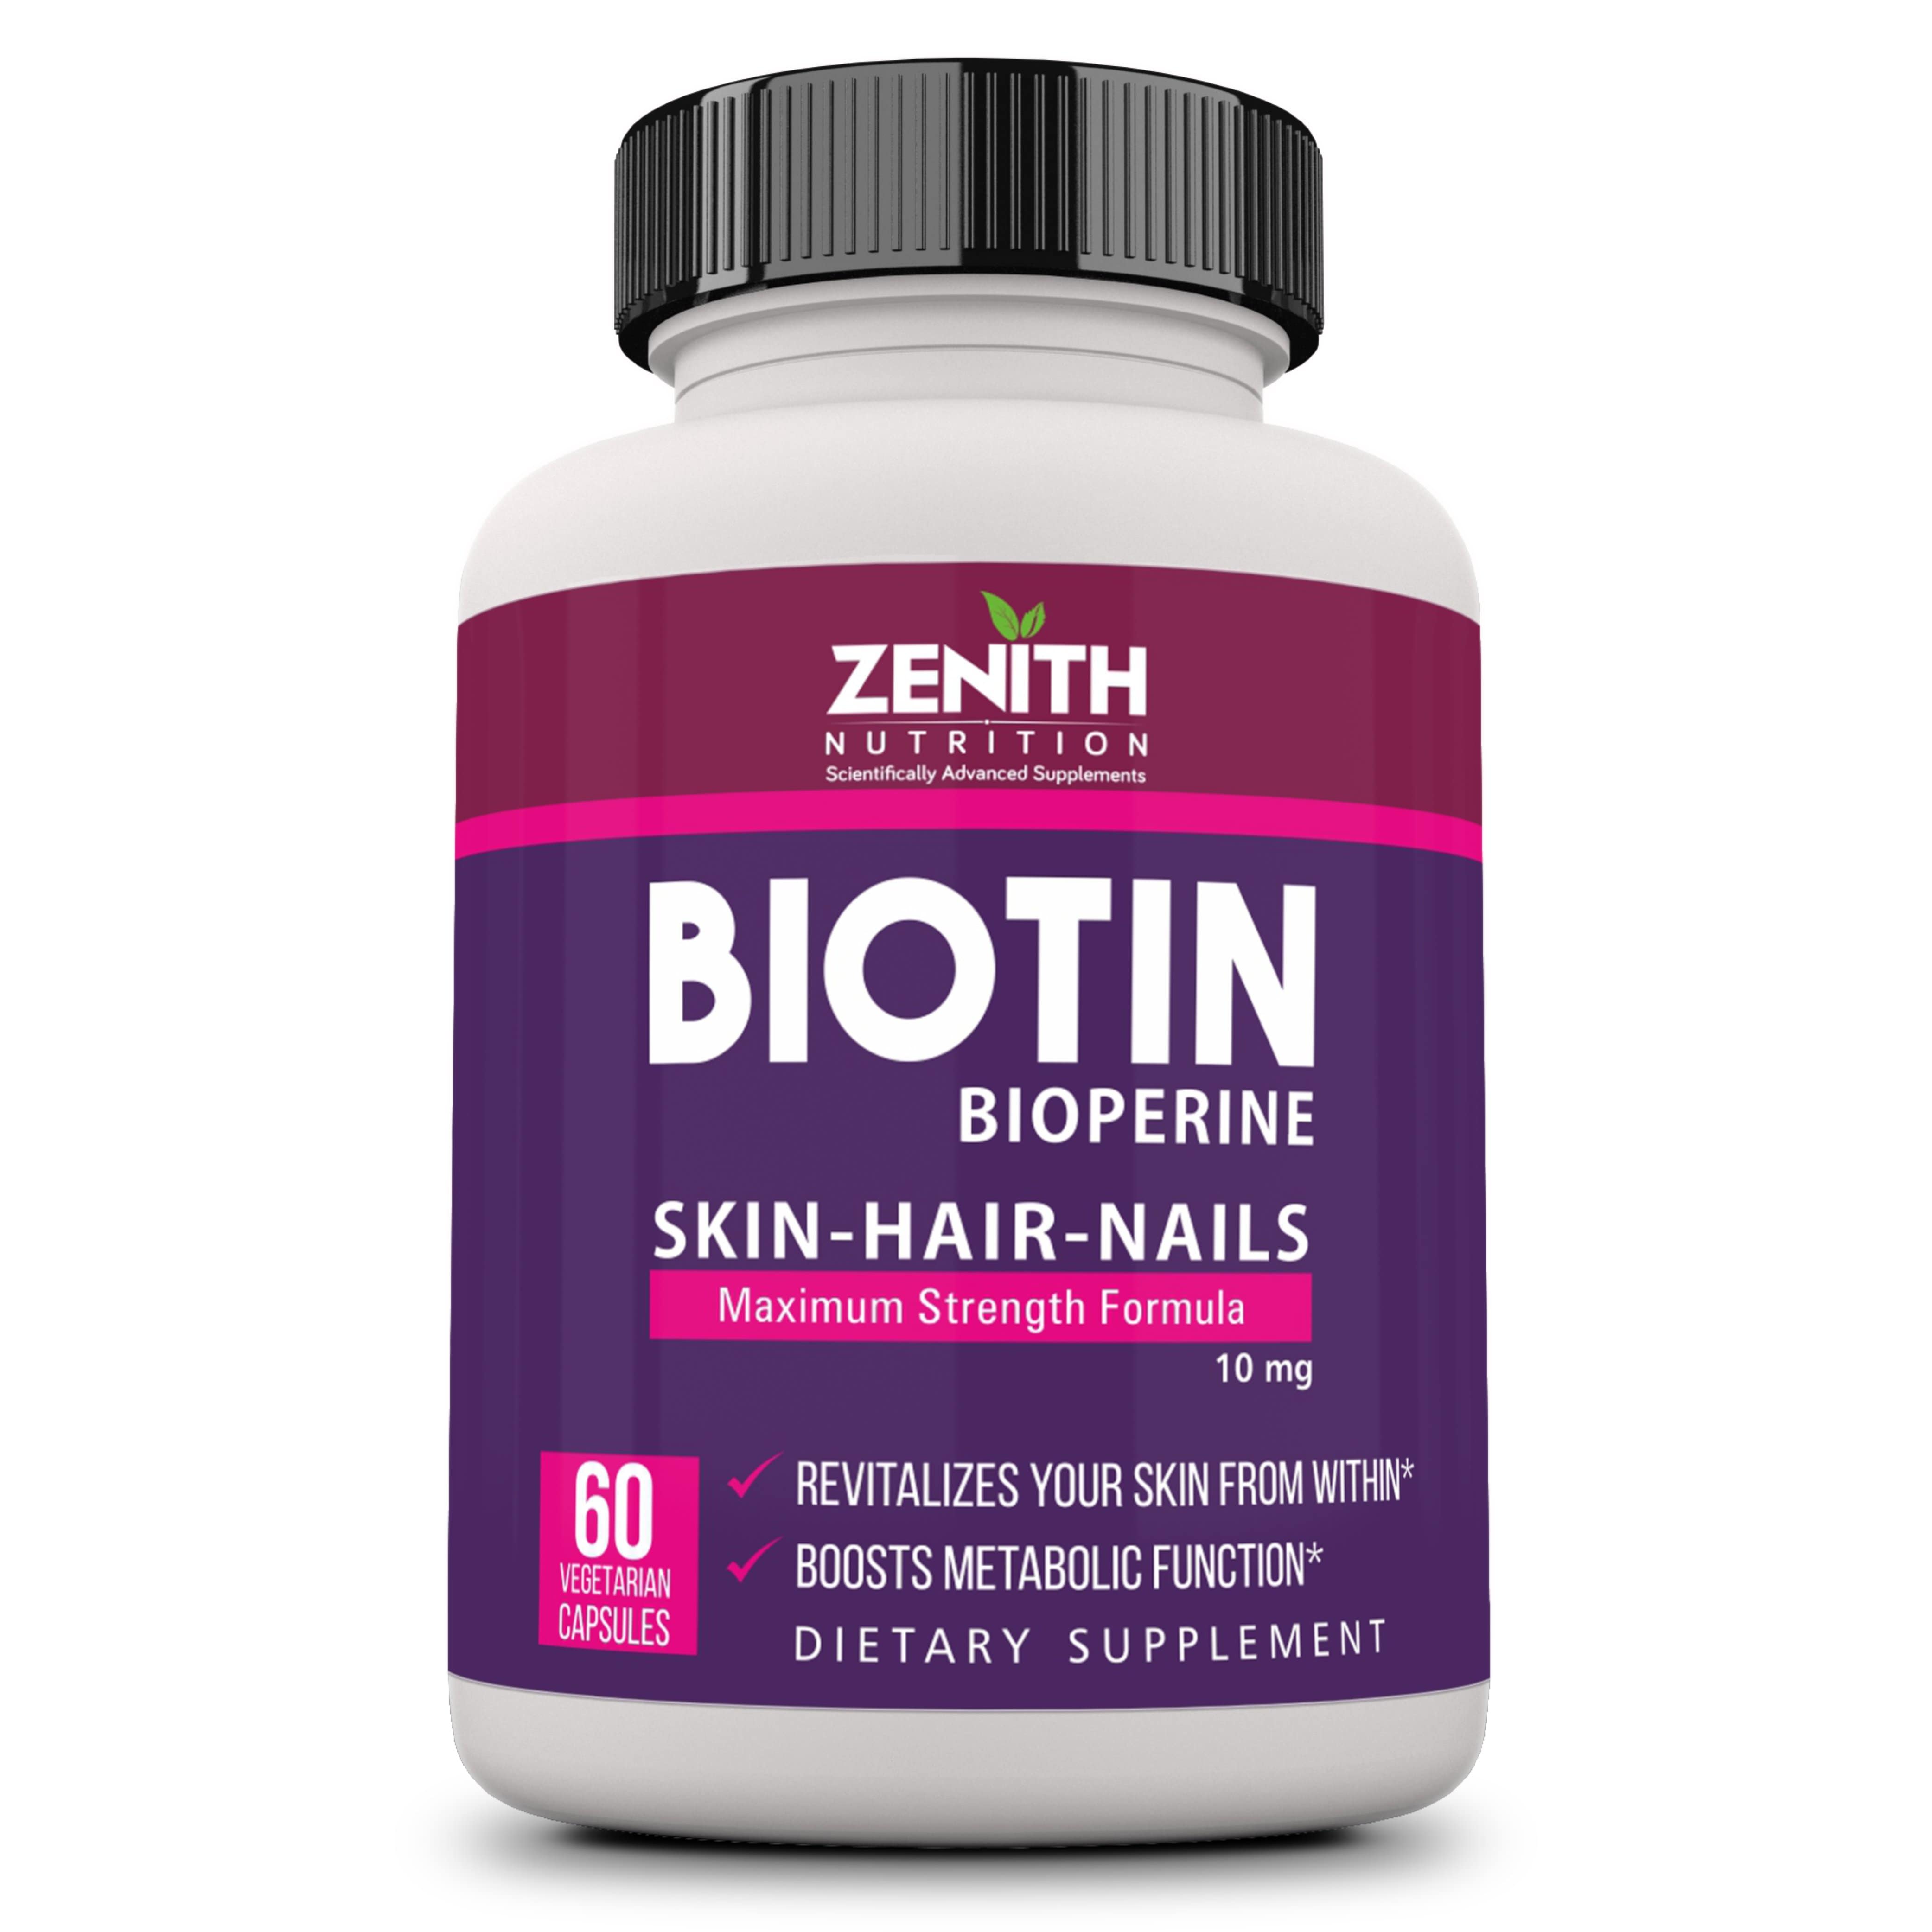 Best Biotin for hair growth are those that support healthy nourished hair